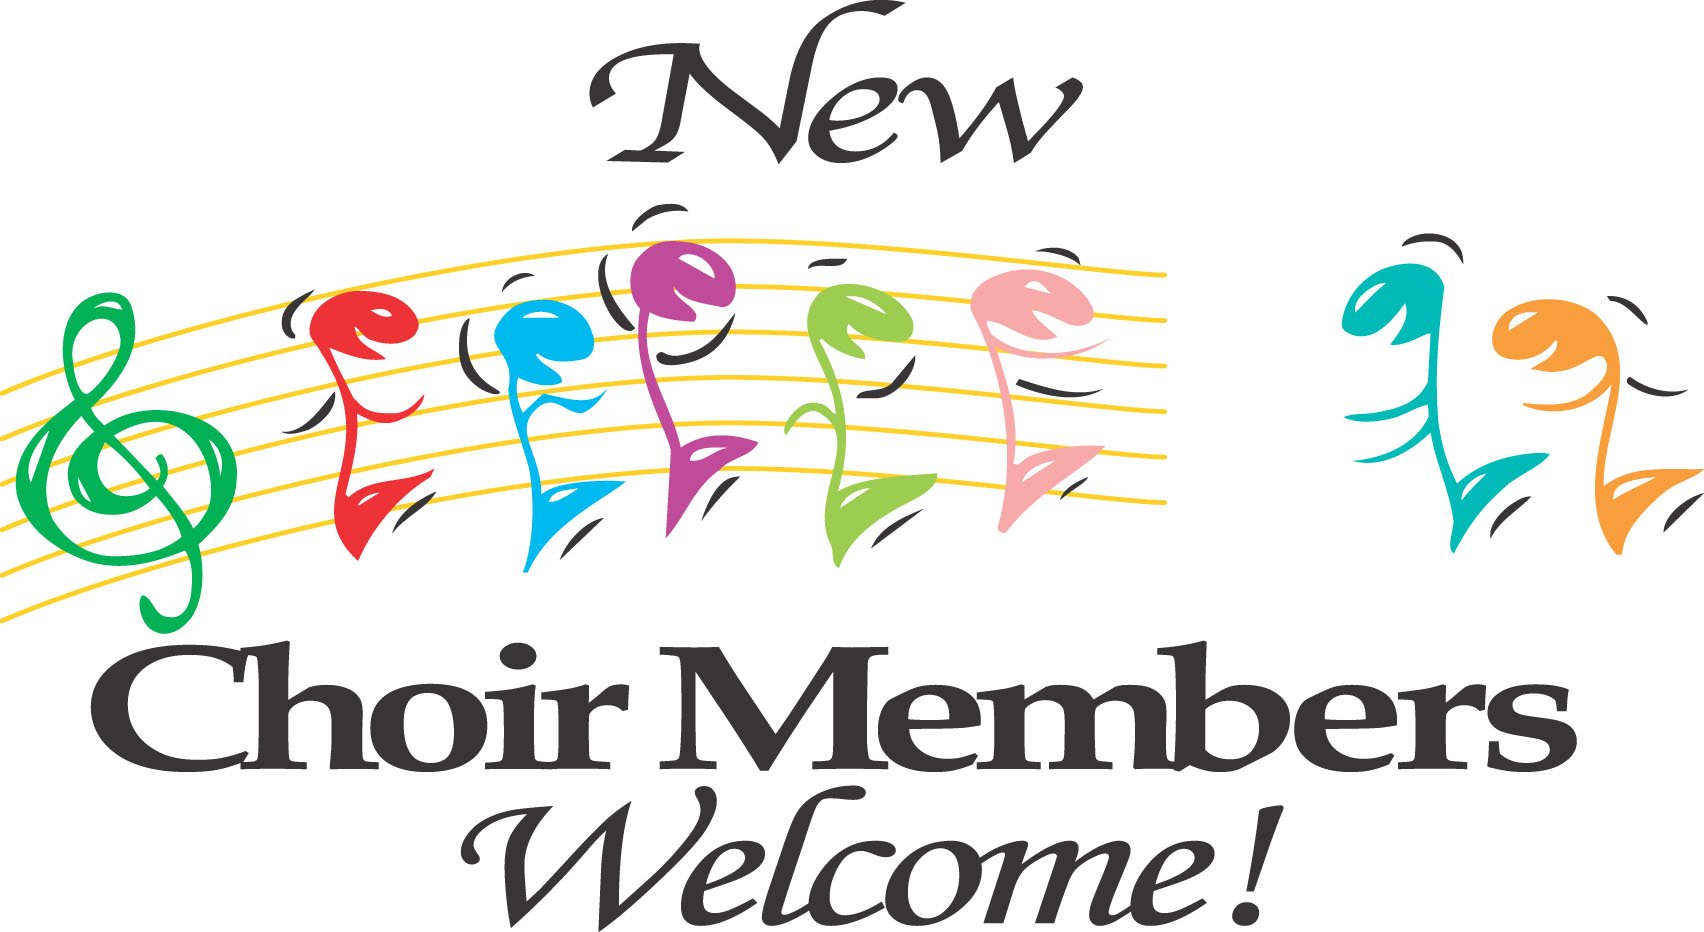 Clip art colourful image of music notes inviting new choir members